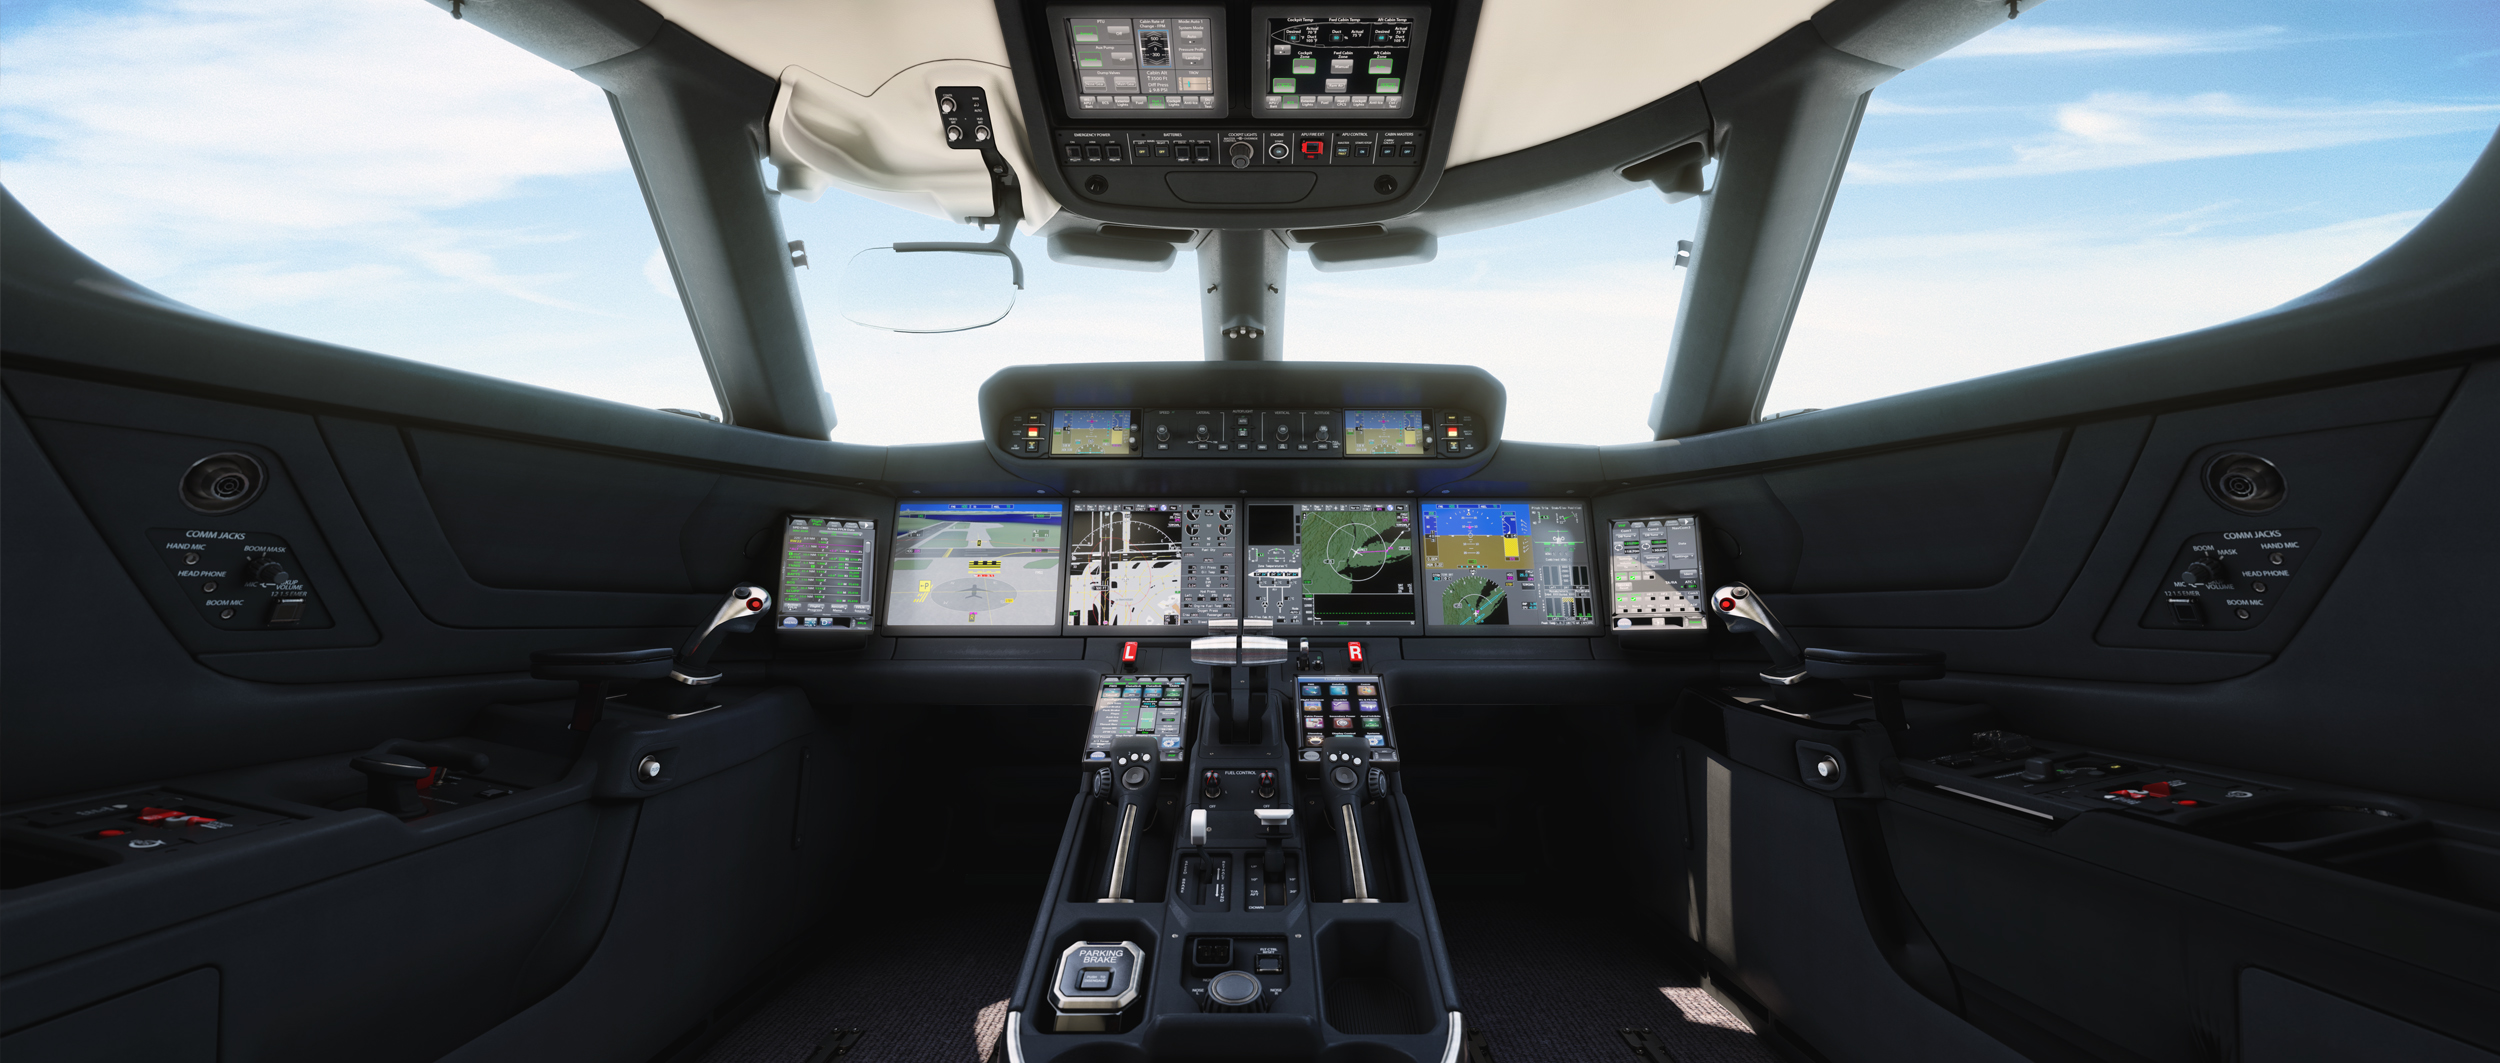                      Take A Look Inside The All Touchscreen Gulfstream G500                             
                     